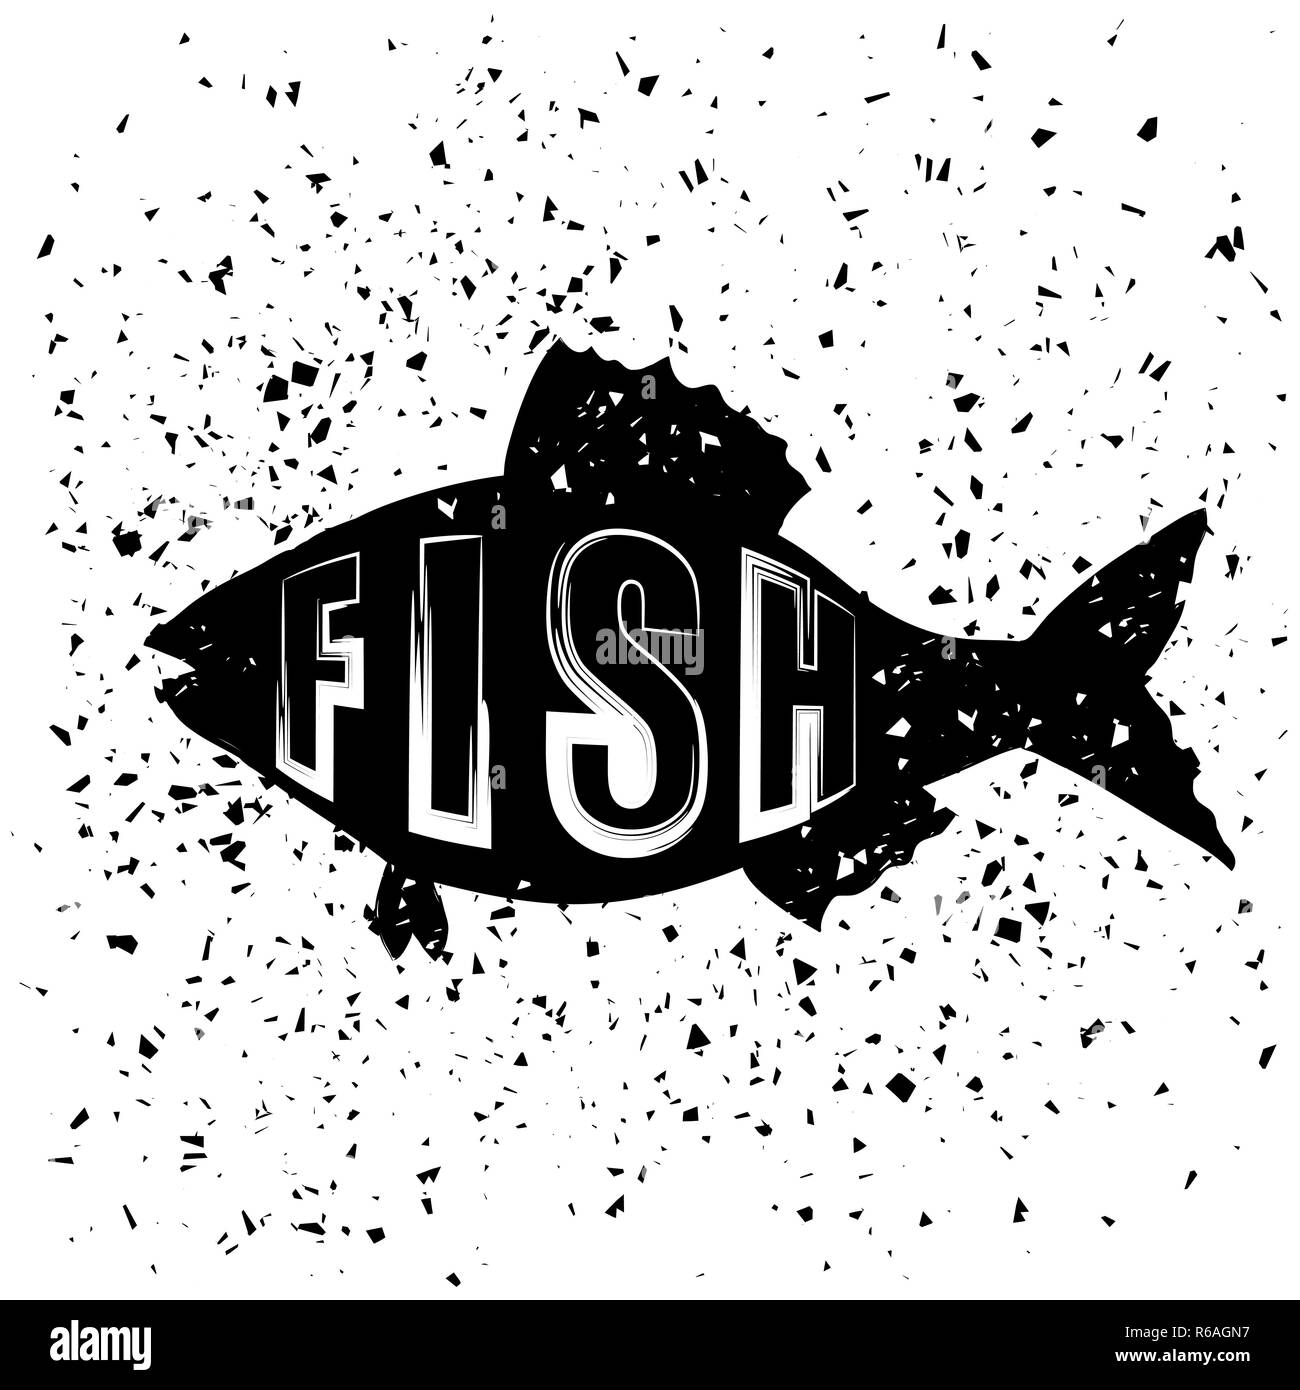 Typography Design of Print with Sea Fish Silhouette Stock Photo